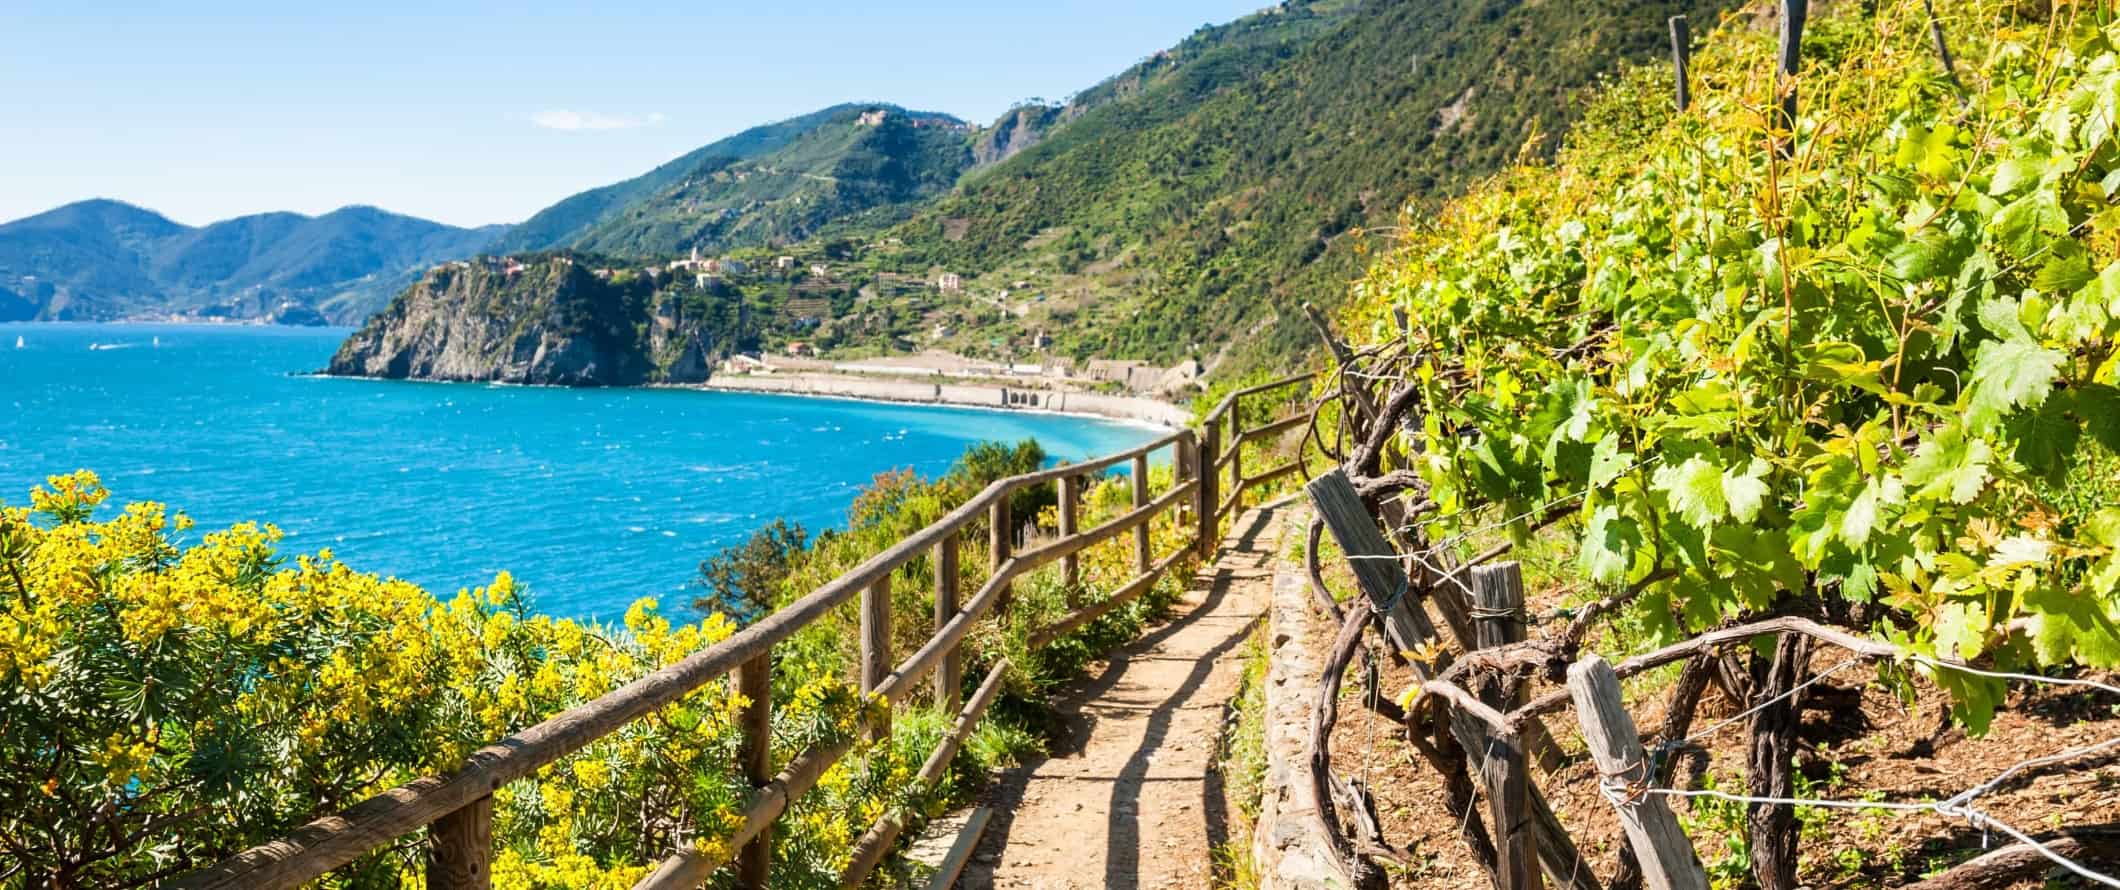 Seaside dirt trail lined with wooden railings on one side and vineyards on the other in the Cinque Terre, Italy.